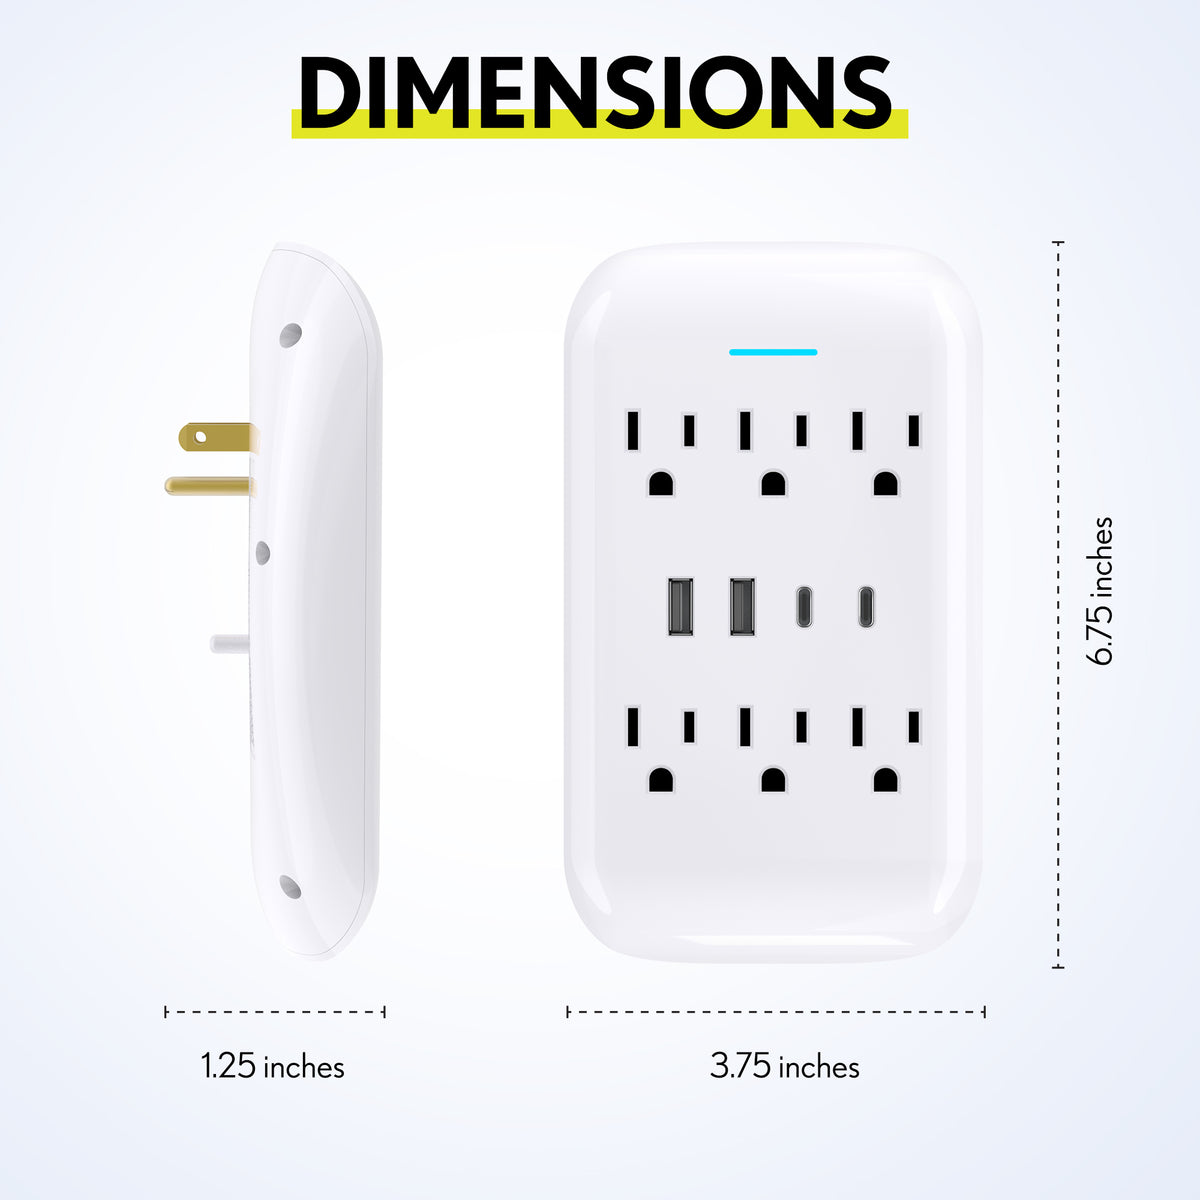 Outlet Extender 10-Port Wall Charger and Surge Protector